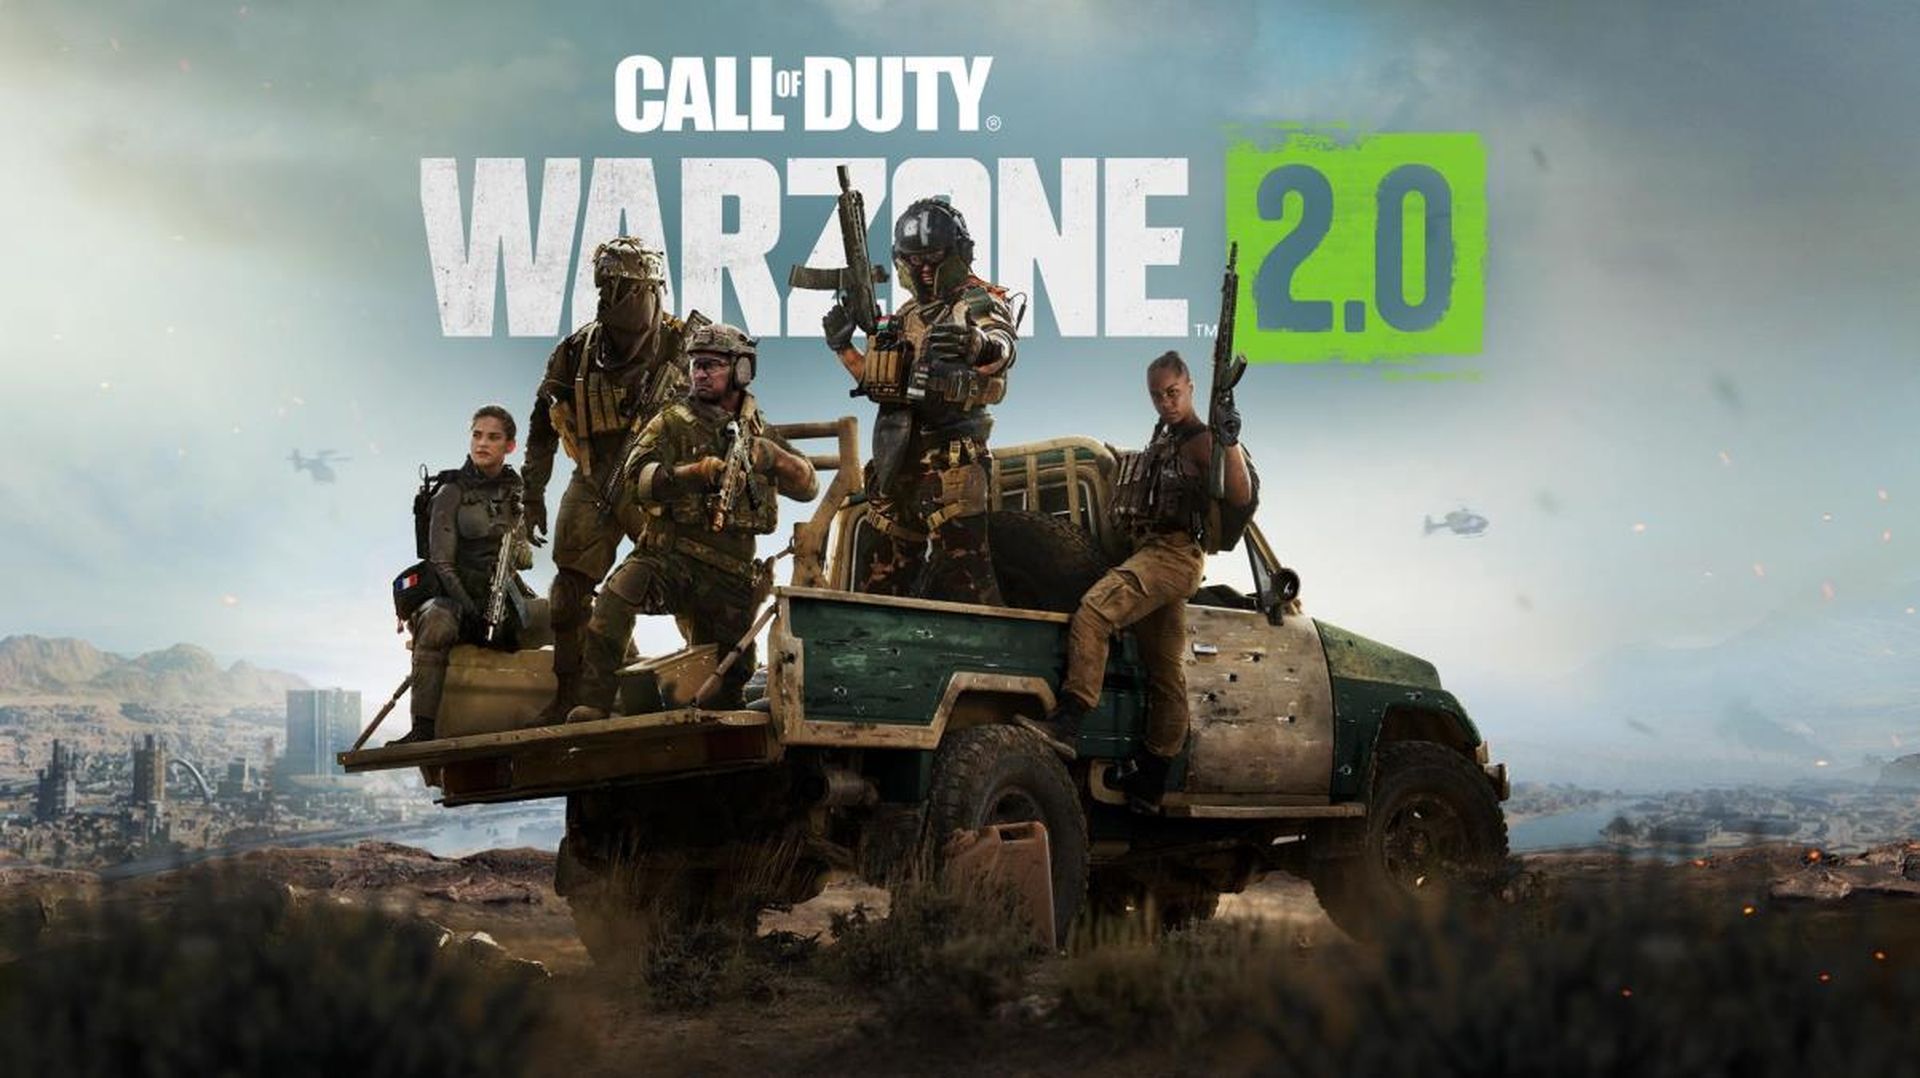 In this article, we are going to be covering what is DMZ Warzone and explain Warzone 2.0 new mode, so you know all there is before you jump into it.